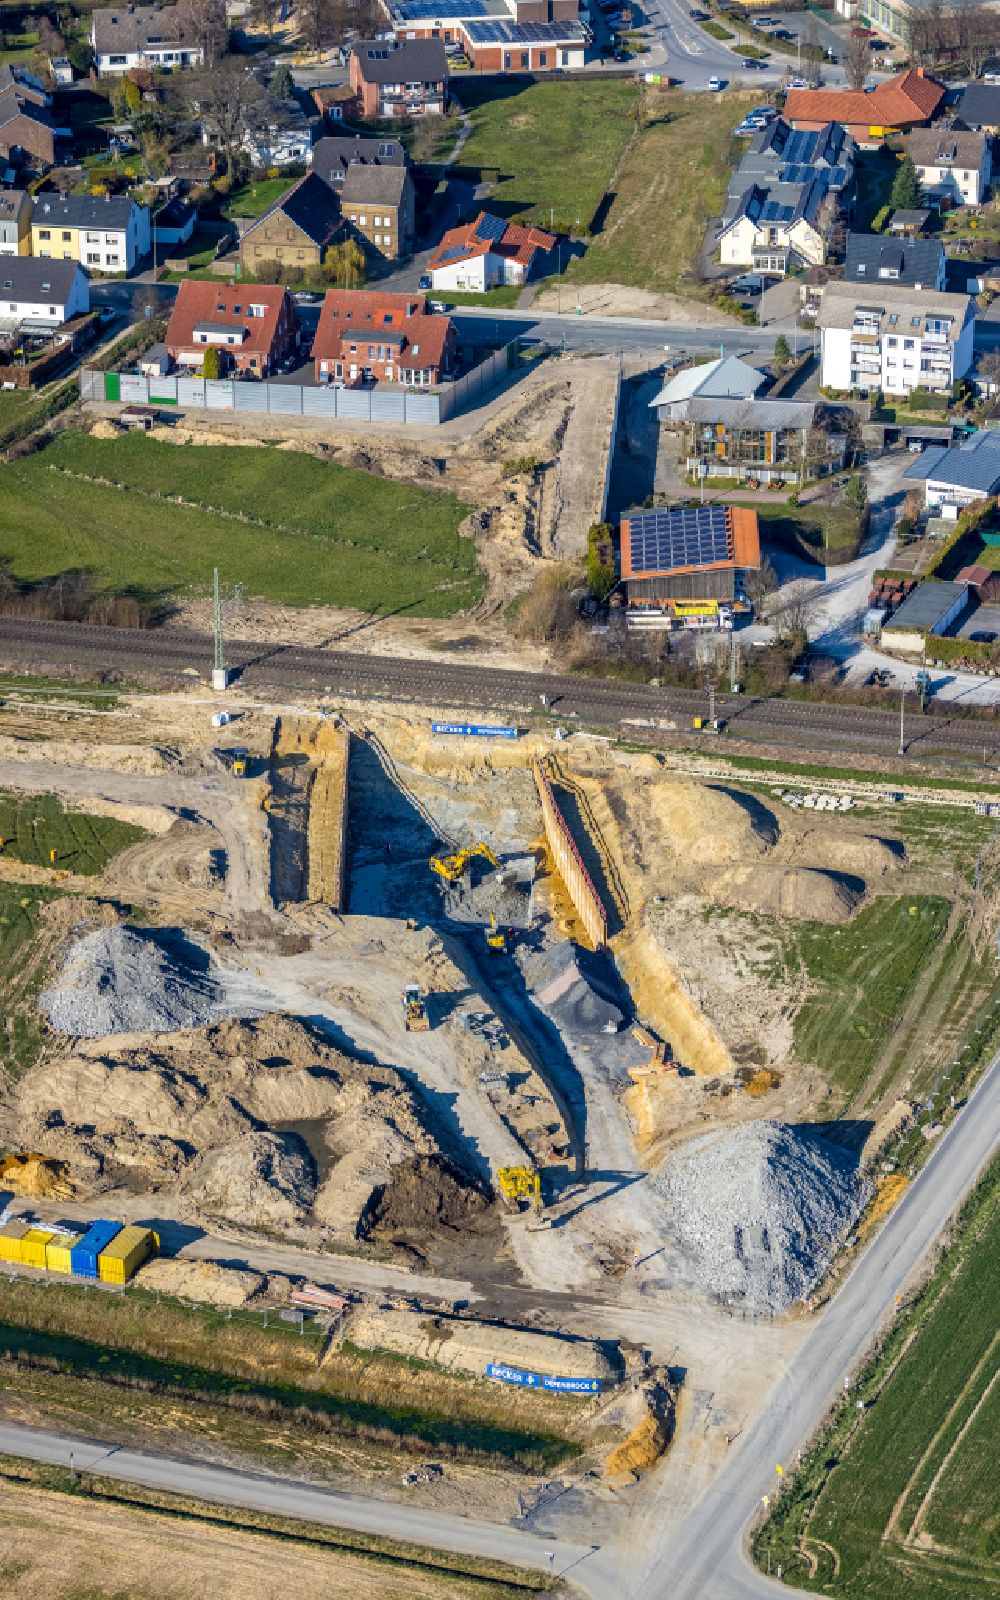 Westtünnen from above - Construction site for the new construction of a tunnel - railway culvert and rainwater retention basin and water reservoir on Verdistrasse in Westtuenen in the Ruhr area in the state of North Rhine-Westphalia, Germany